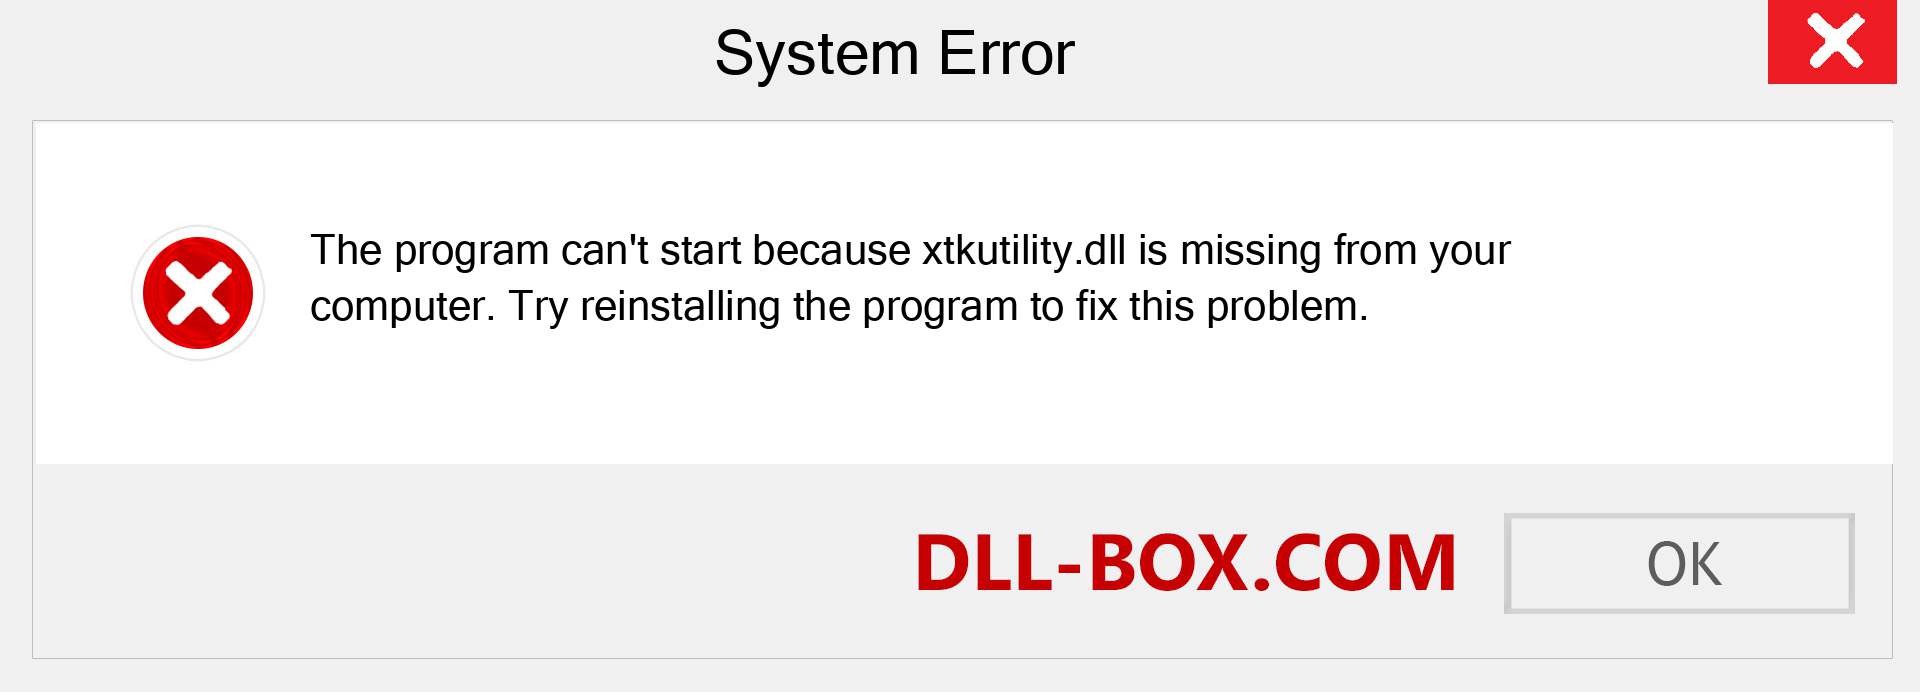  xtkutility.dll file is missing?. Download for Windows 7, 8, 10 - Fix  xtkutility dll Missing Error on Windows, photos, images